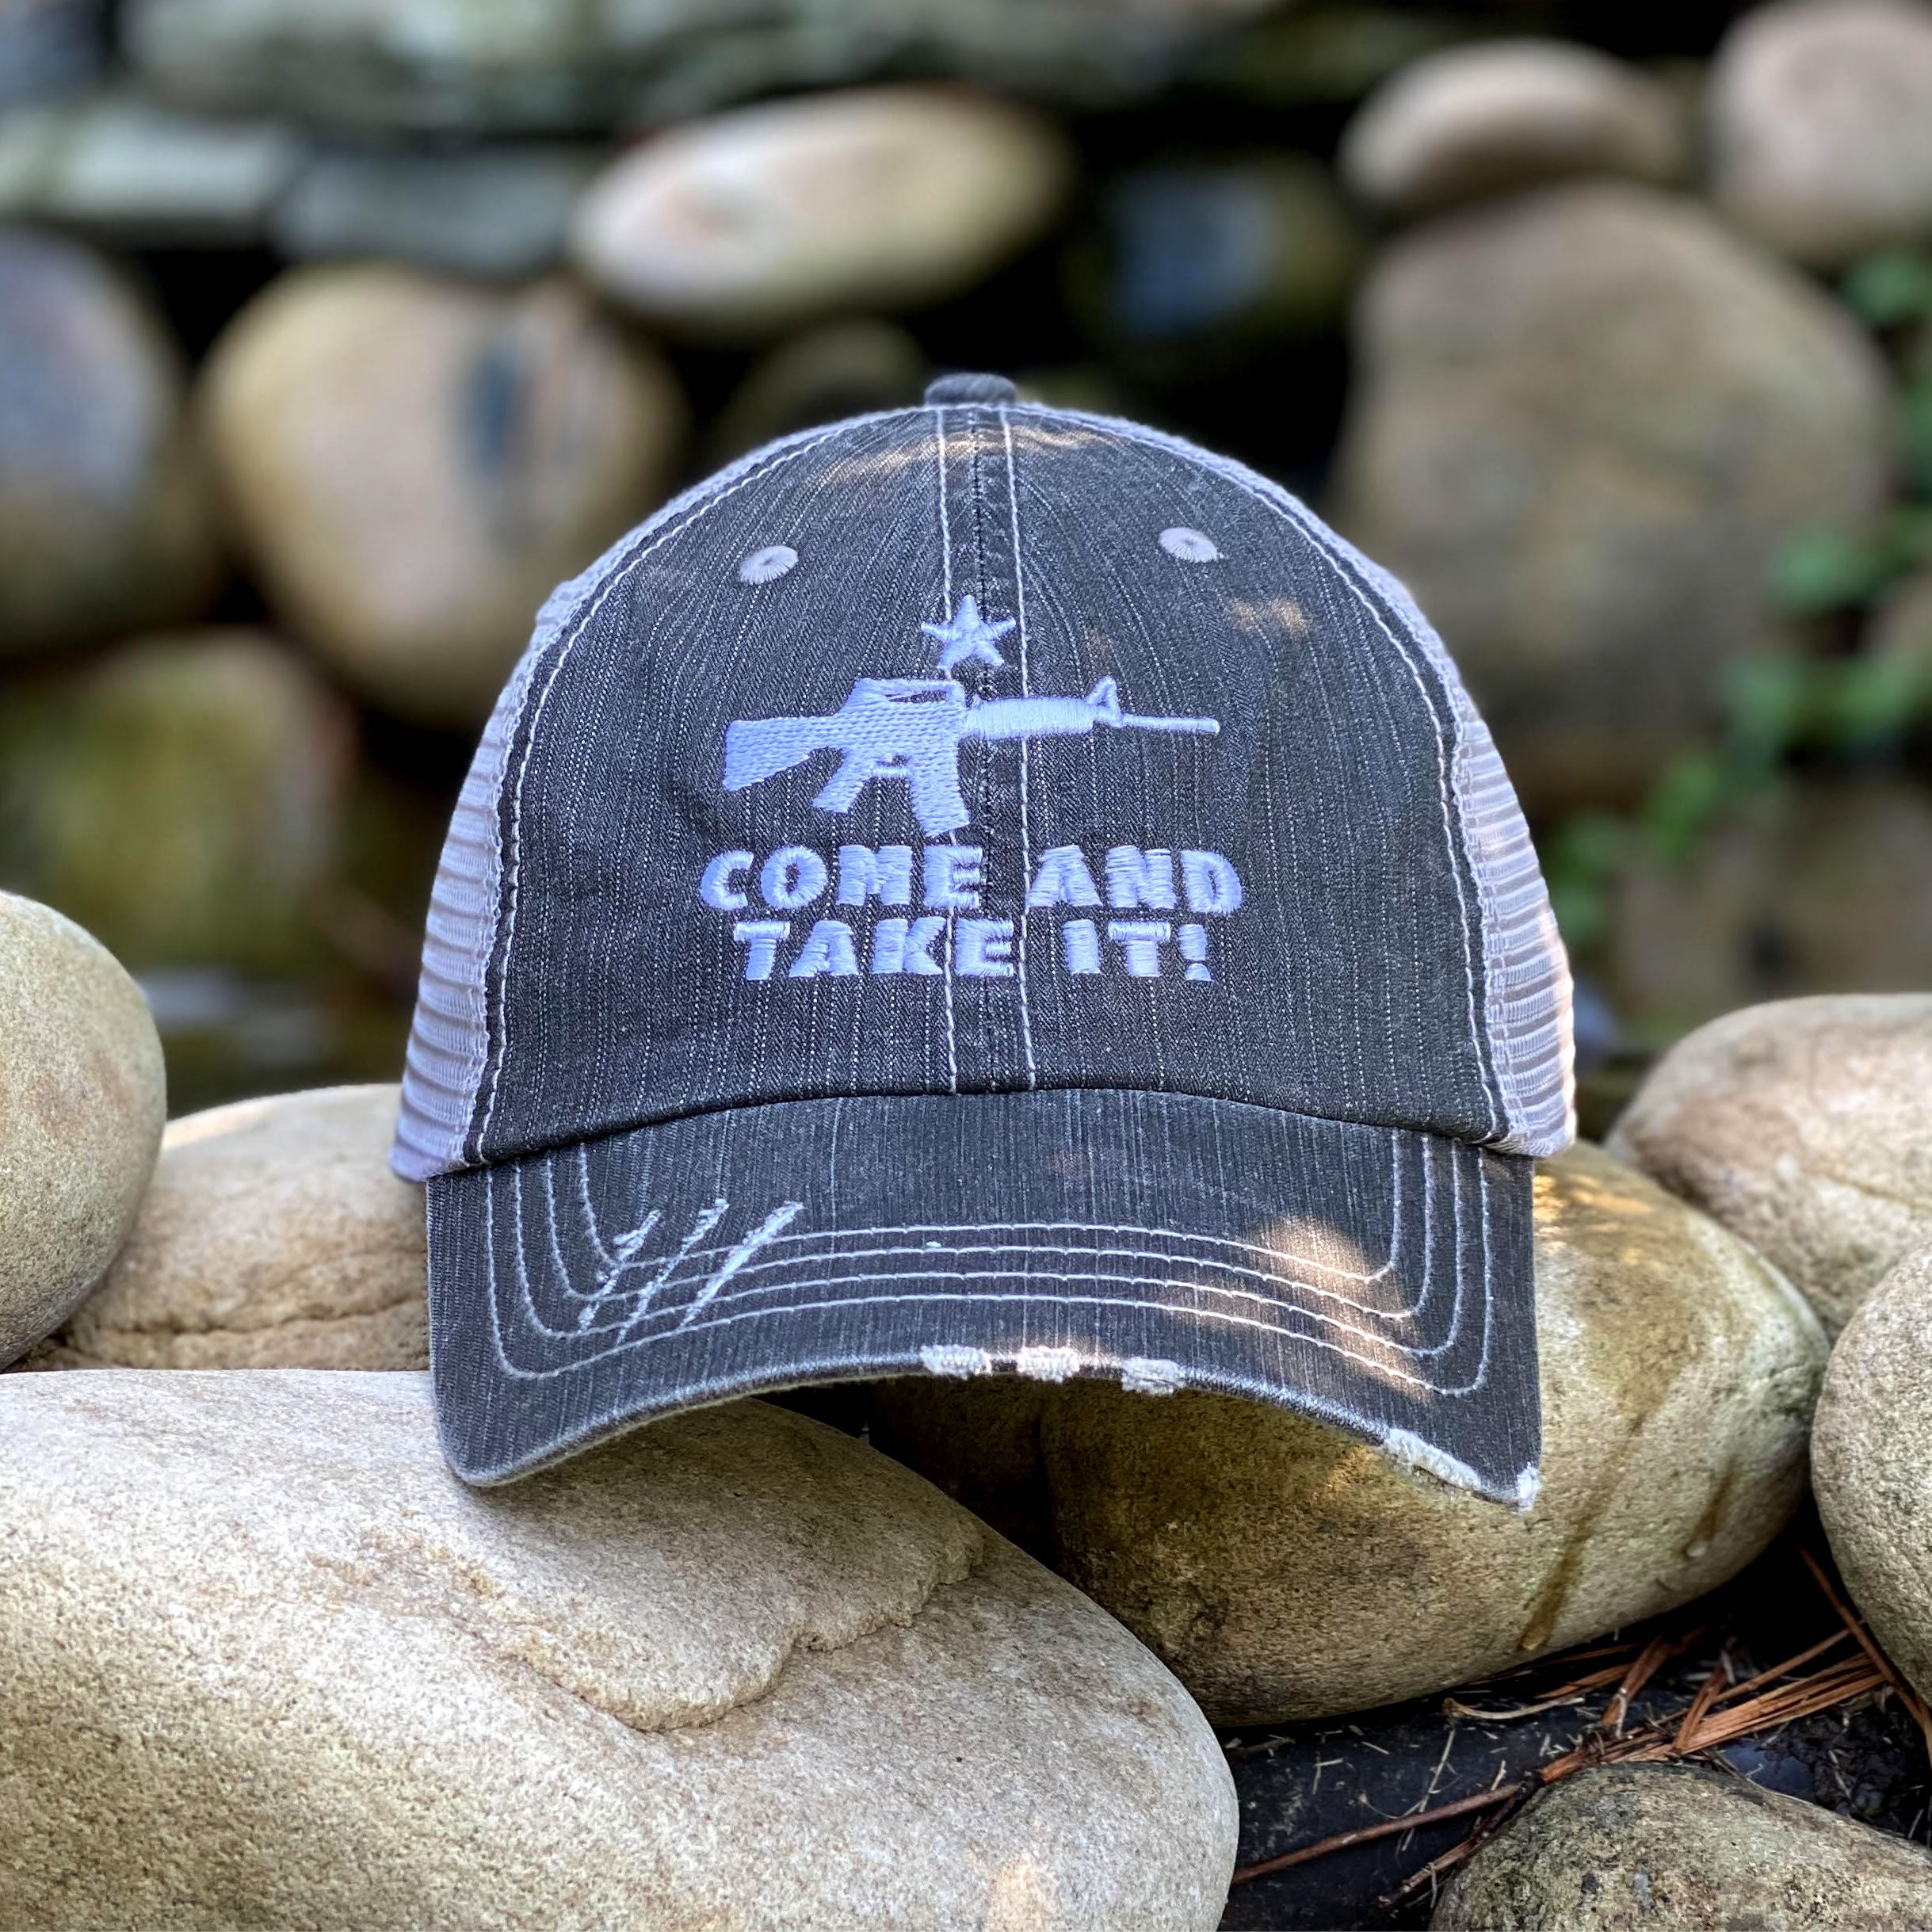 Come And Take It Distressed Style AR-15 Hat Hats 